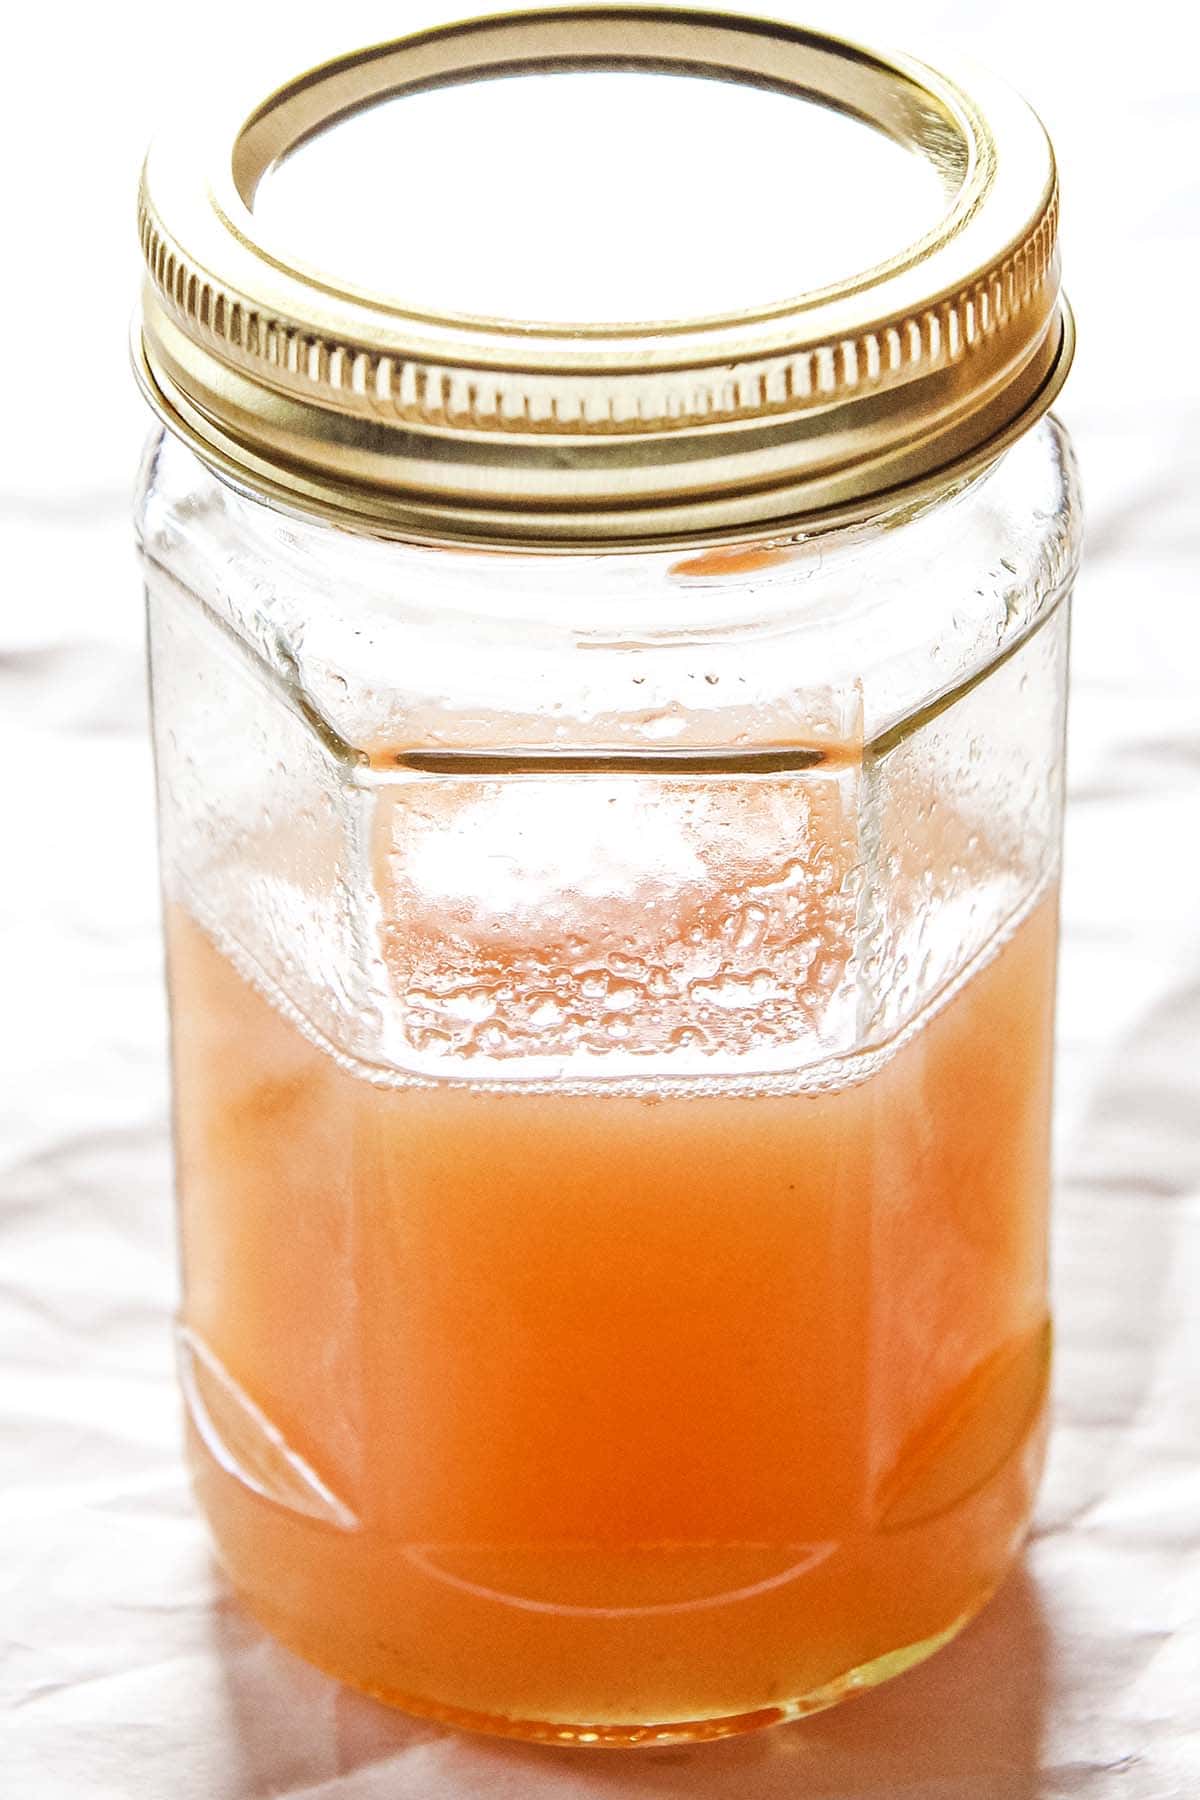 finished rhubarb cocktail syrup in glass jar